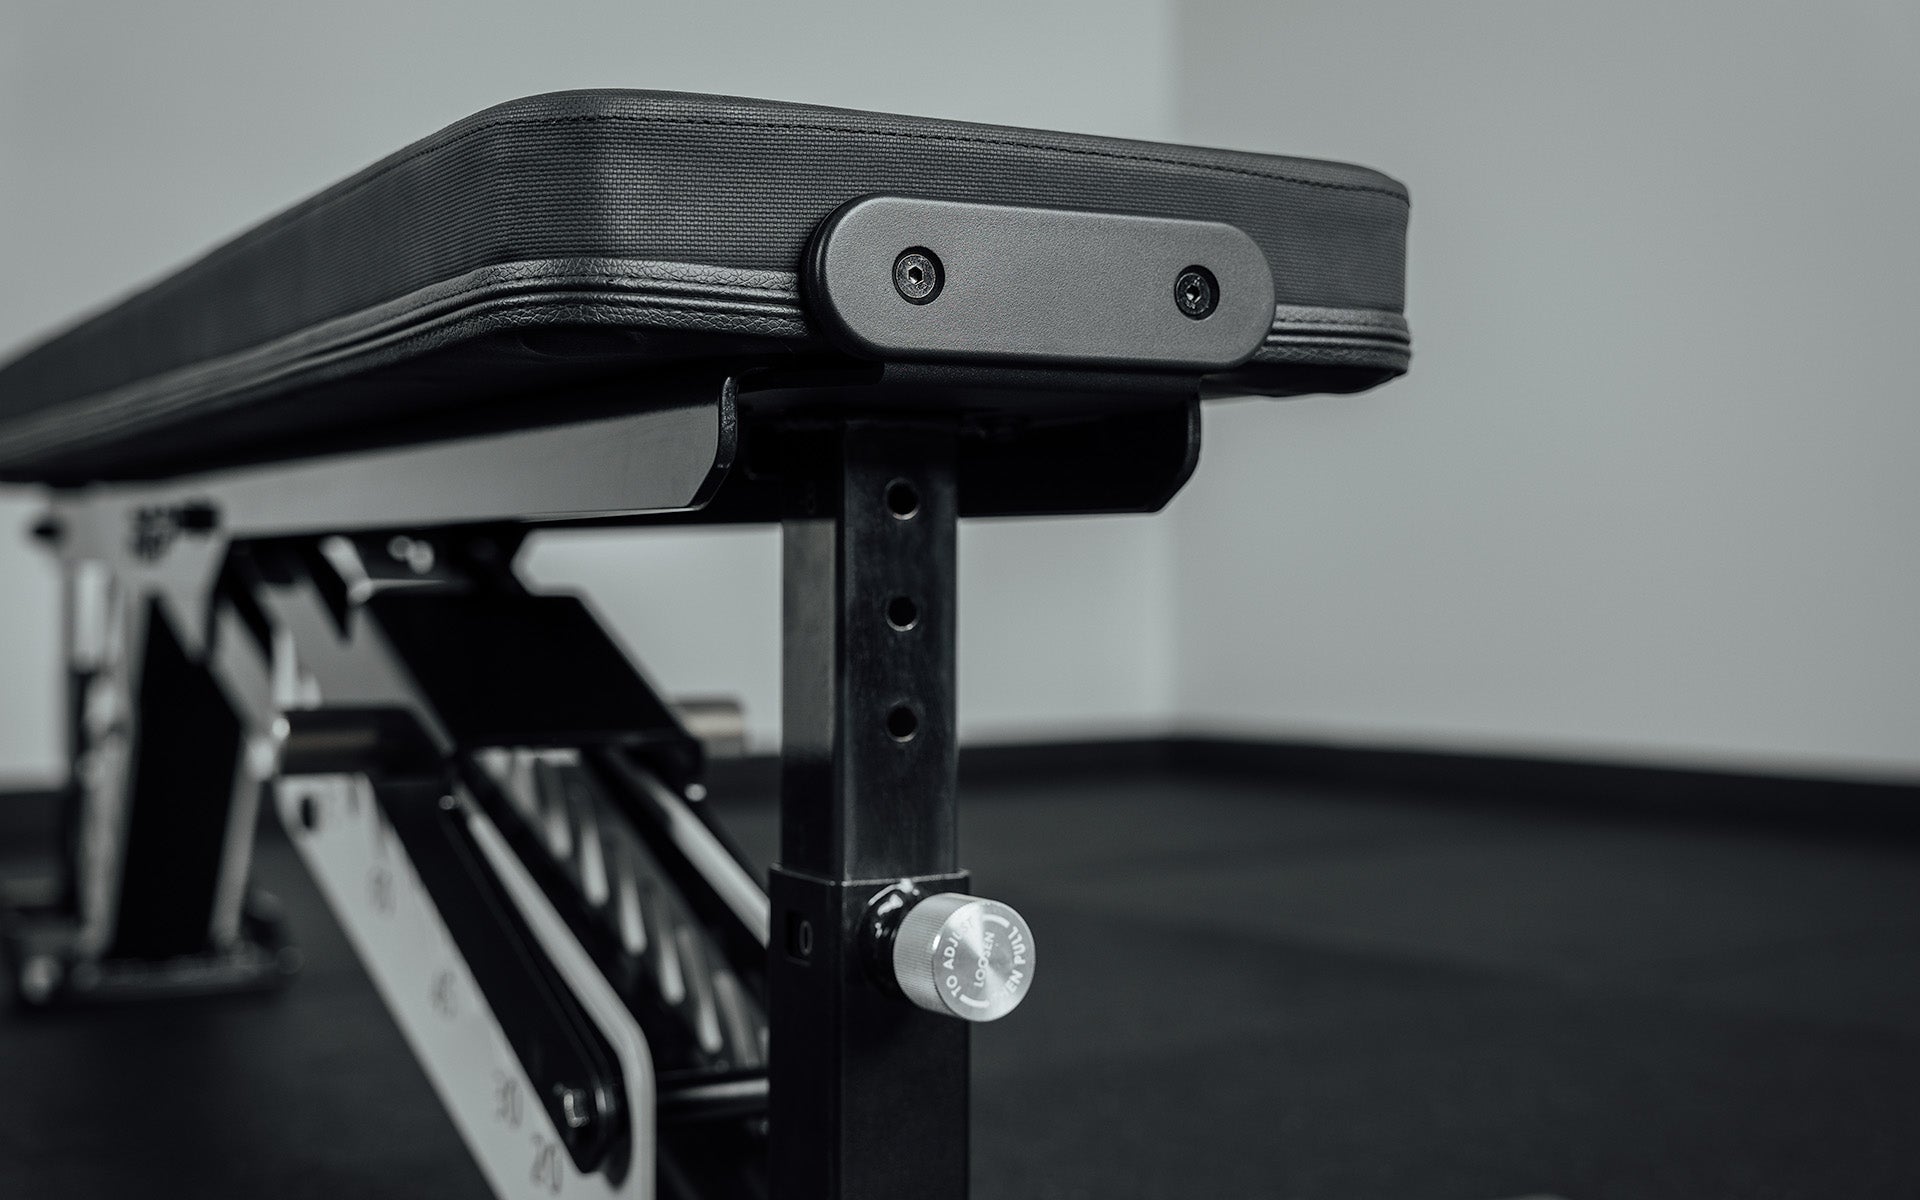 AB-5200 2.0 Adjustable Weight Bench